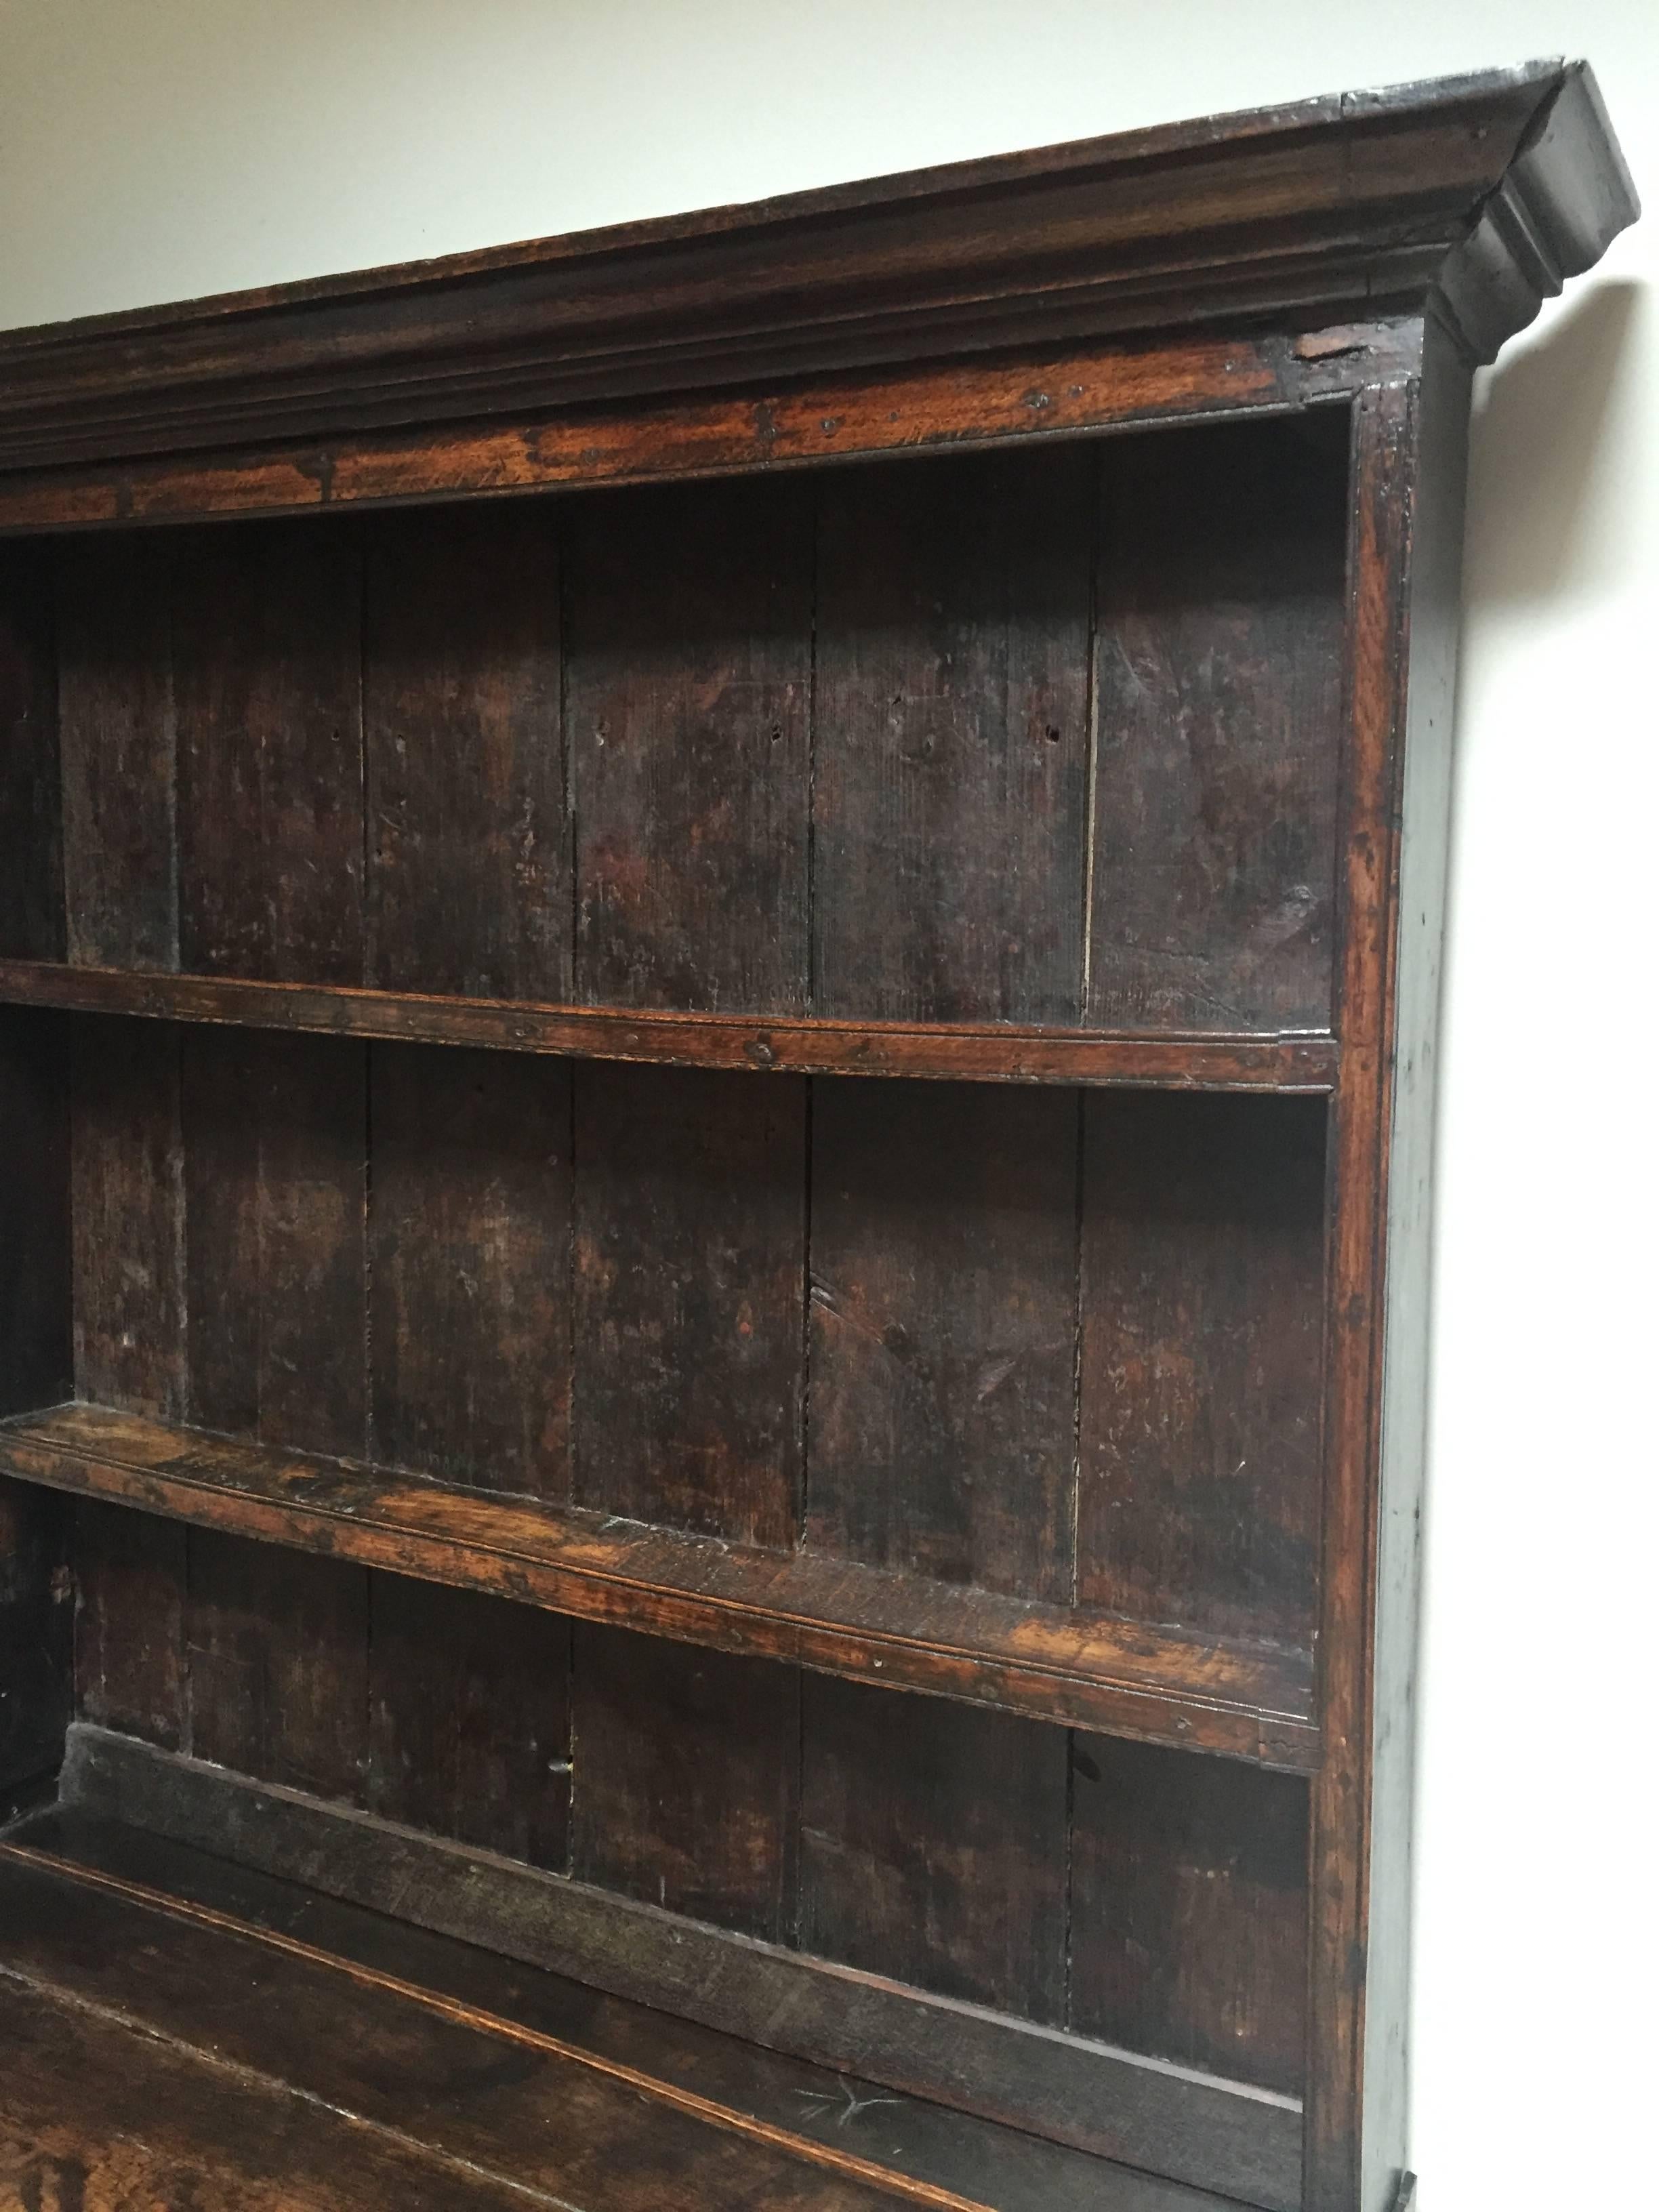 English Welsh dresser,18th century, oak
with two small drawers.
Great patina.